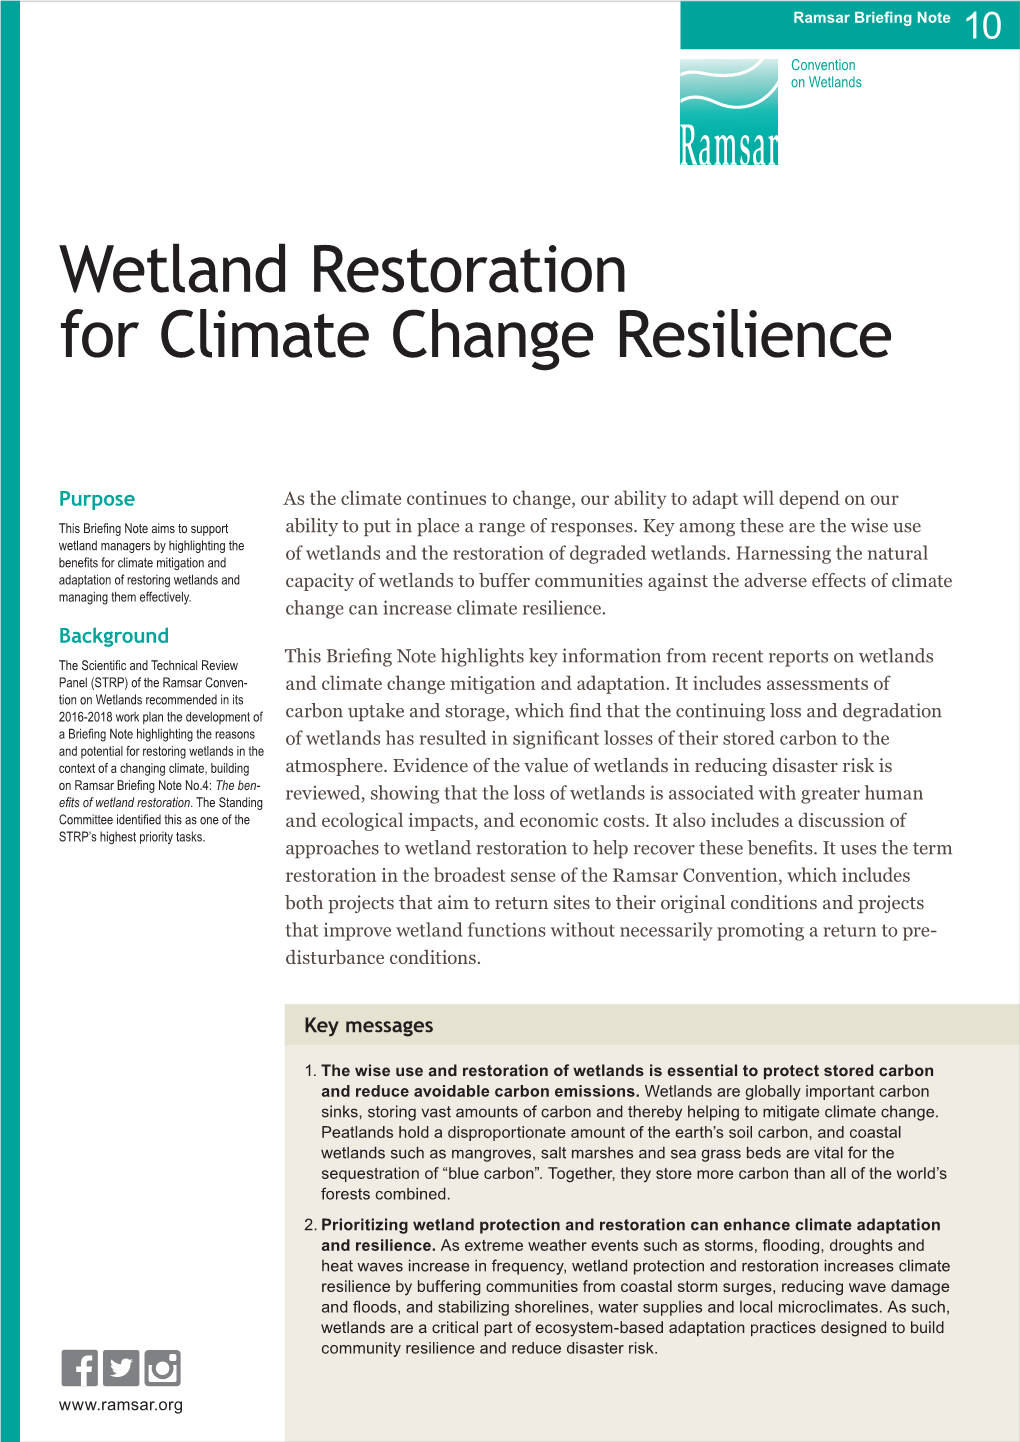 Wetland Restoration for Climate Change Resilience